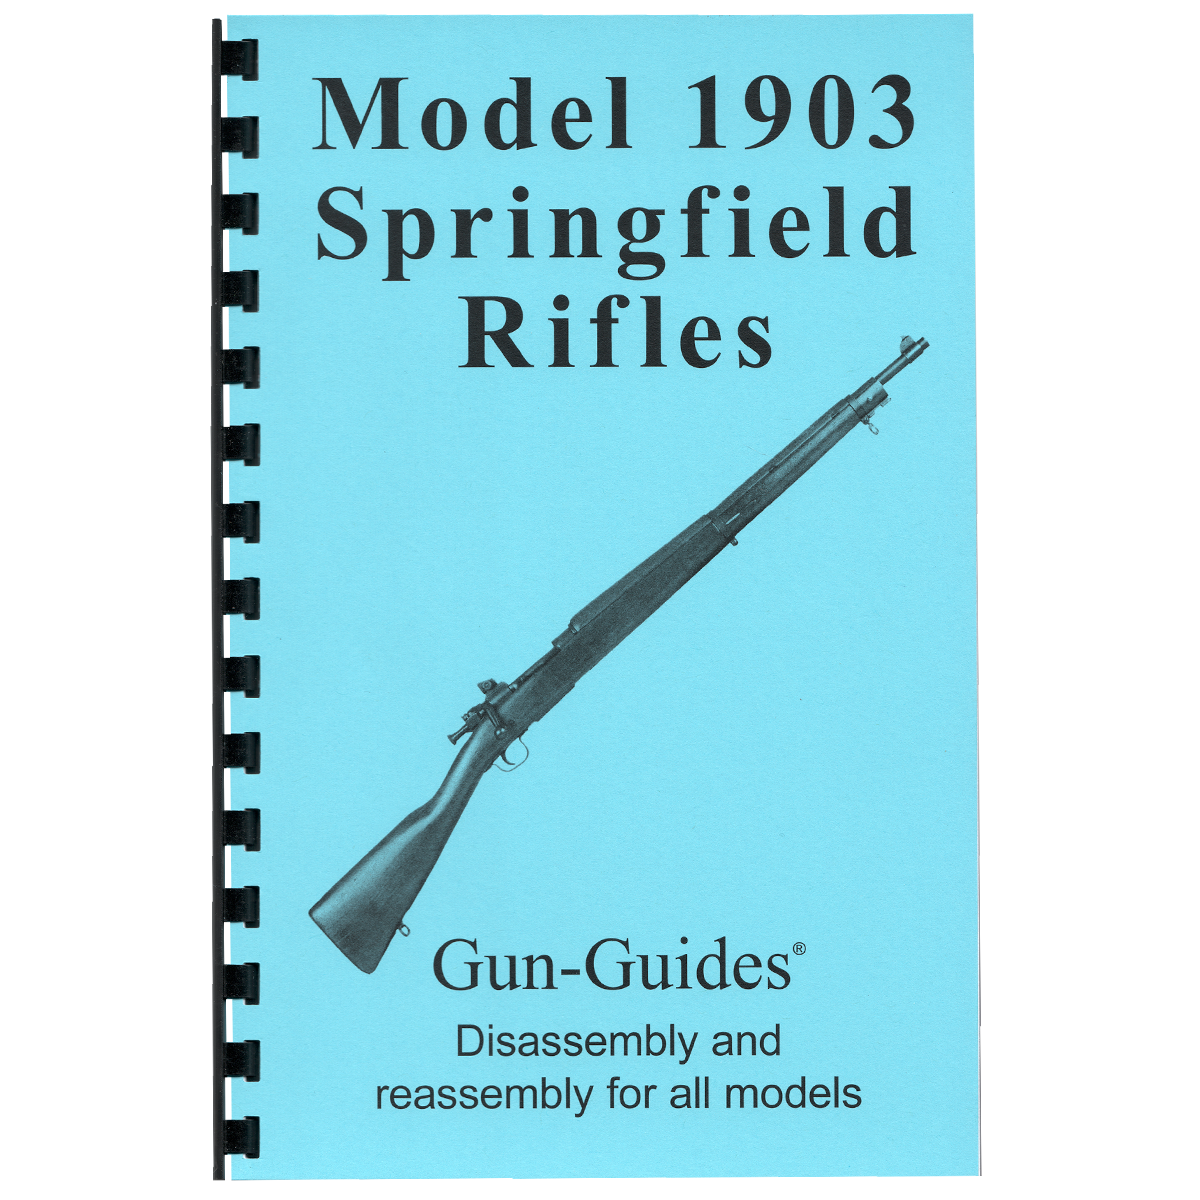 Model 1903 Springfield Rifles Gun-Guides® Disassembly & Reassembly for All Models